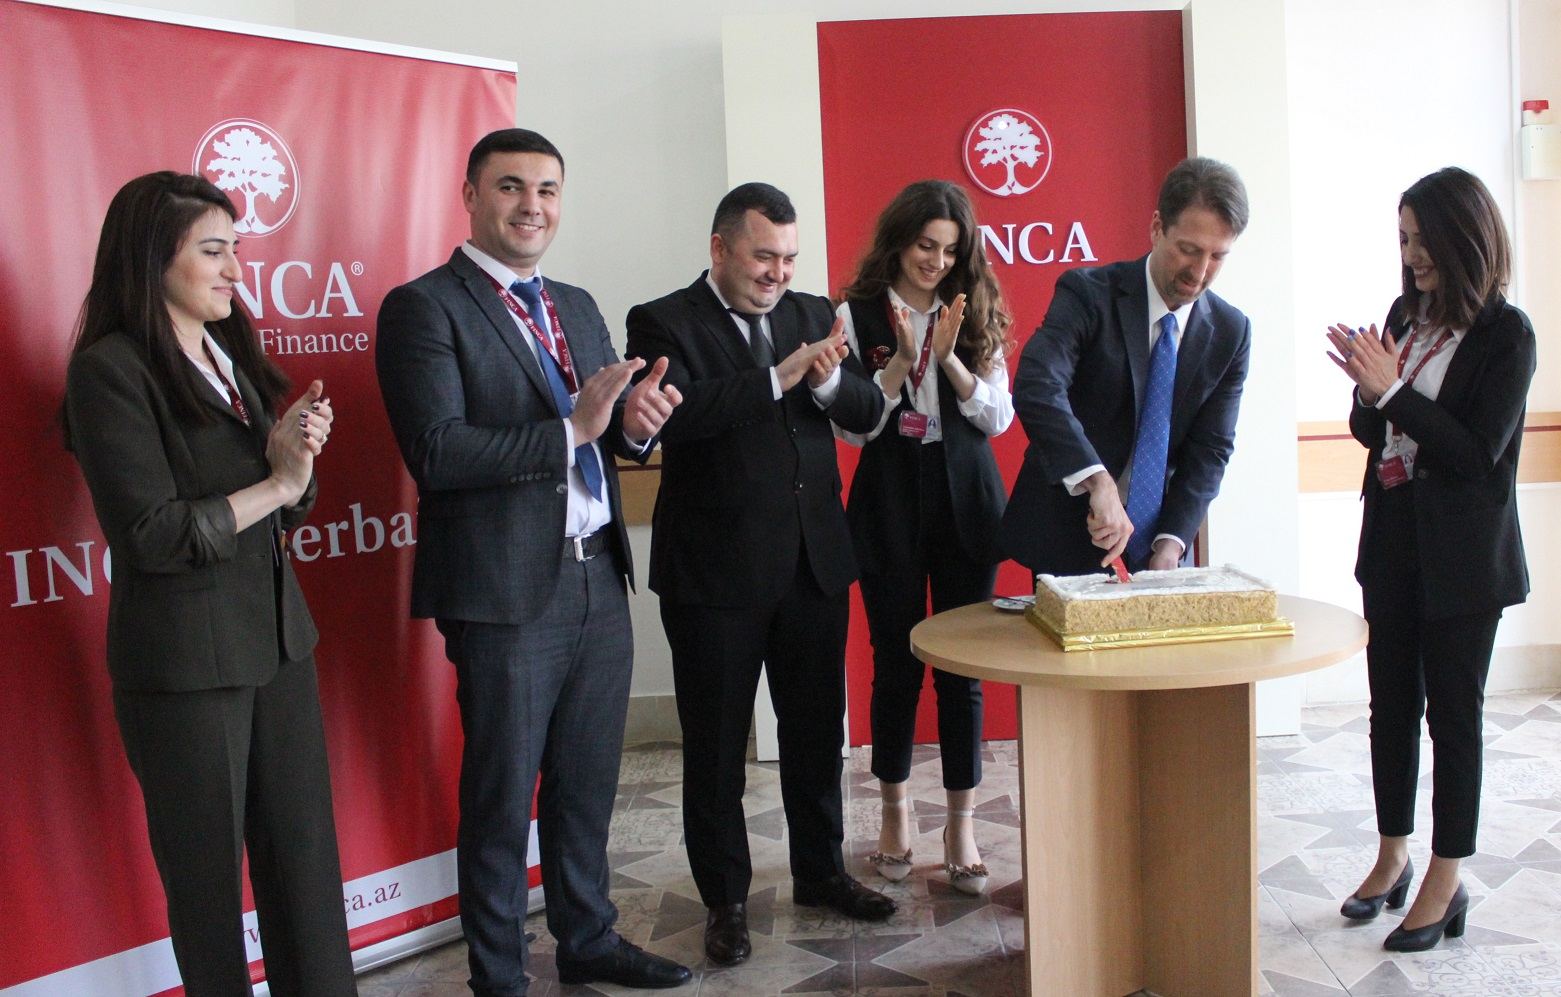 FINCA Azerbaijan holds opening ceremony for two new branches (PHOTO)